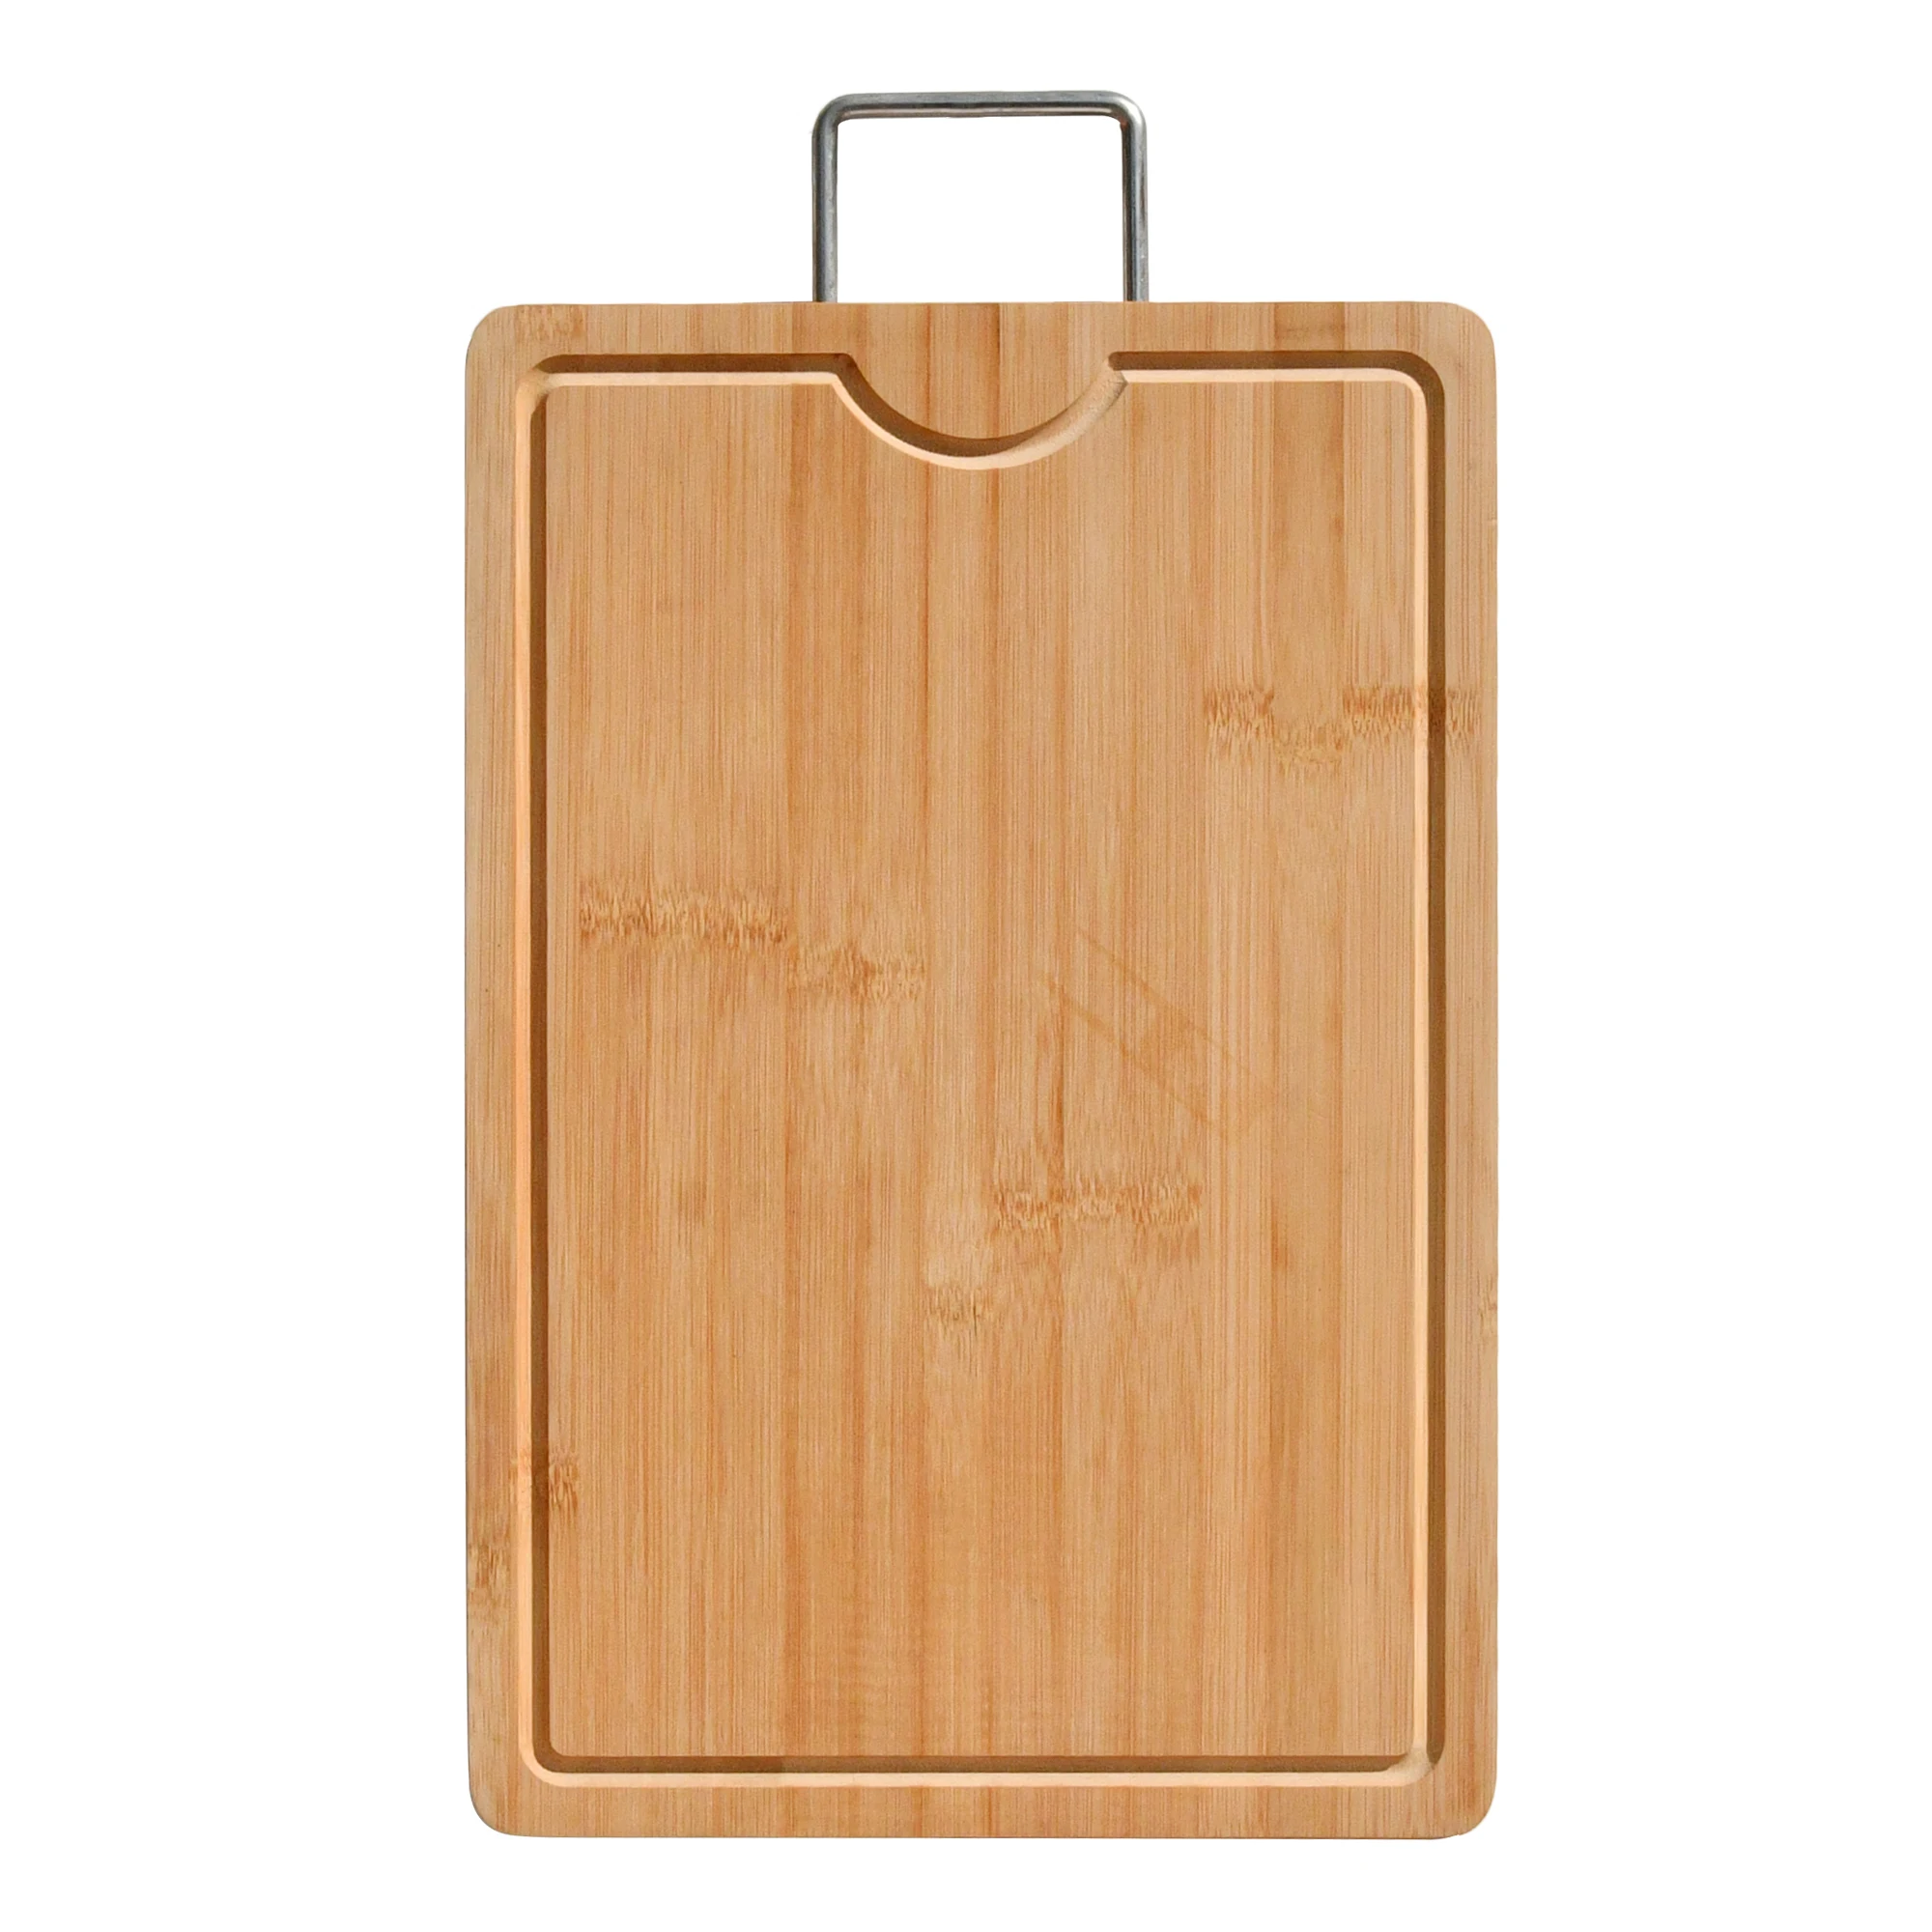 Easy-to-Clean Bamboo Wood Cutting Board With Flexible Metal Handle , Heavy Duty Chopping Boards For Kitchen